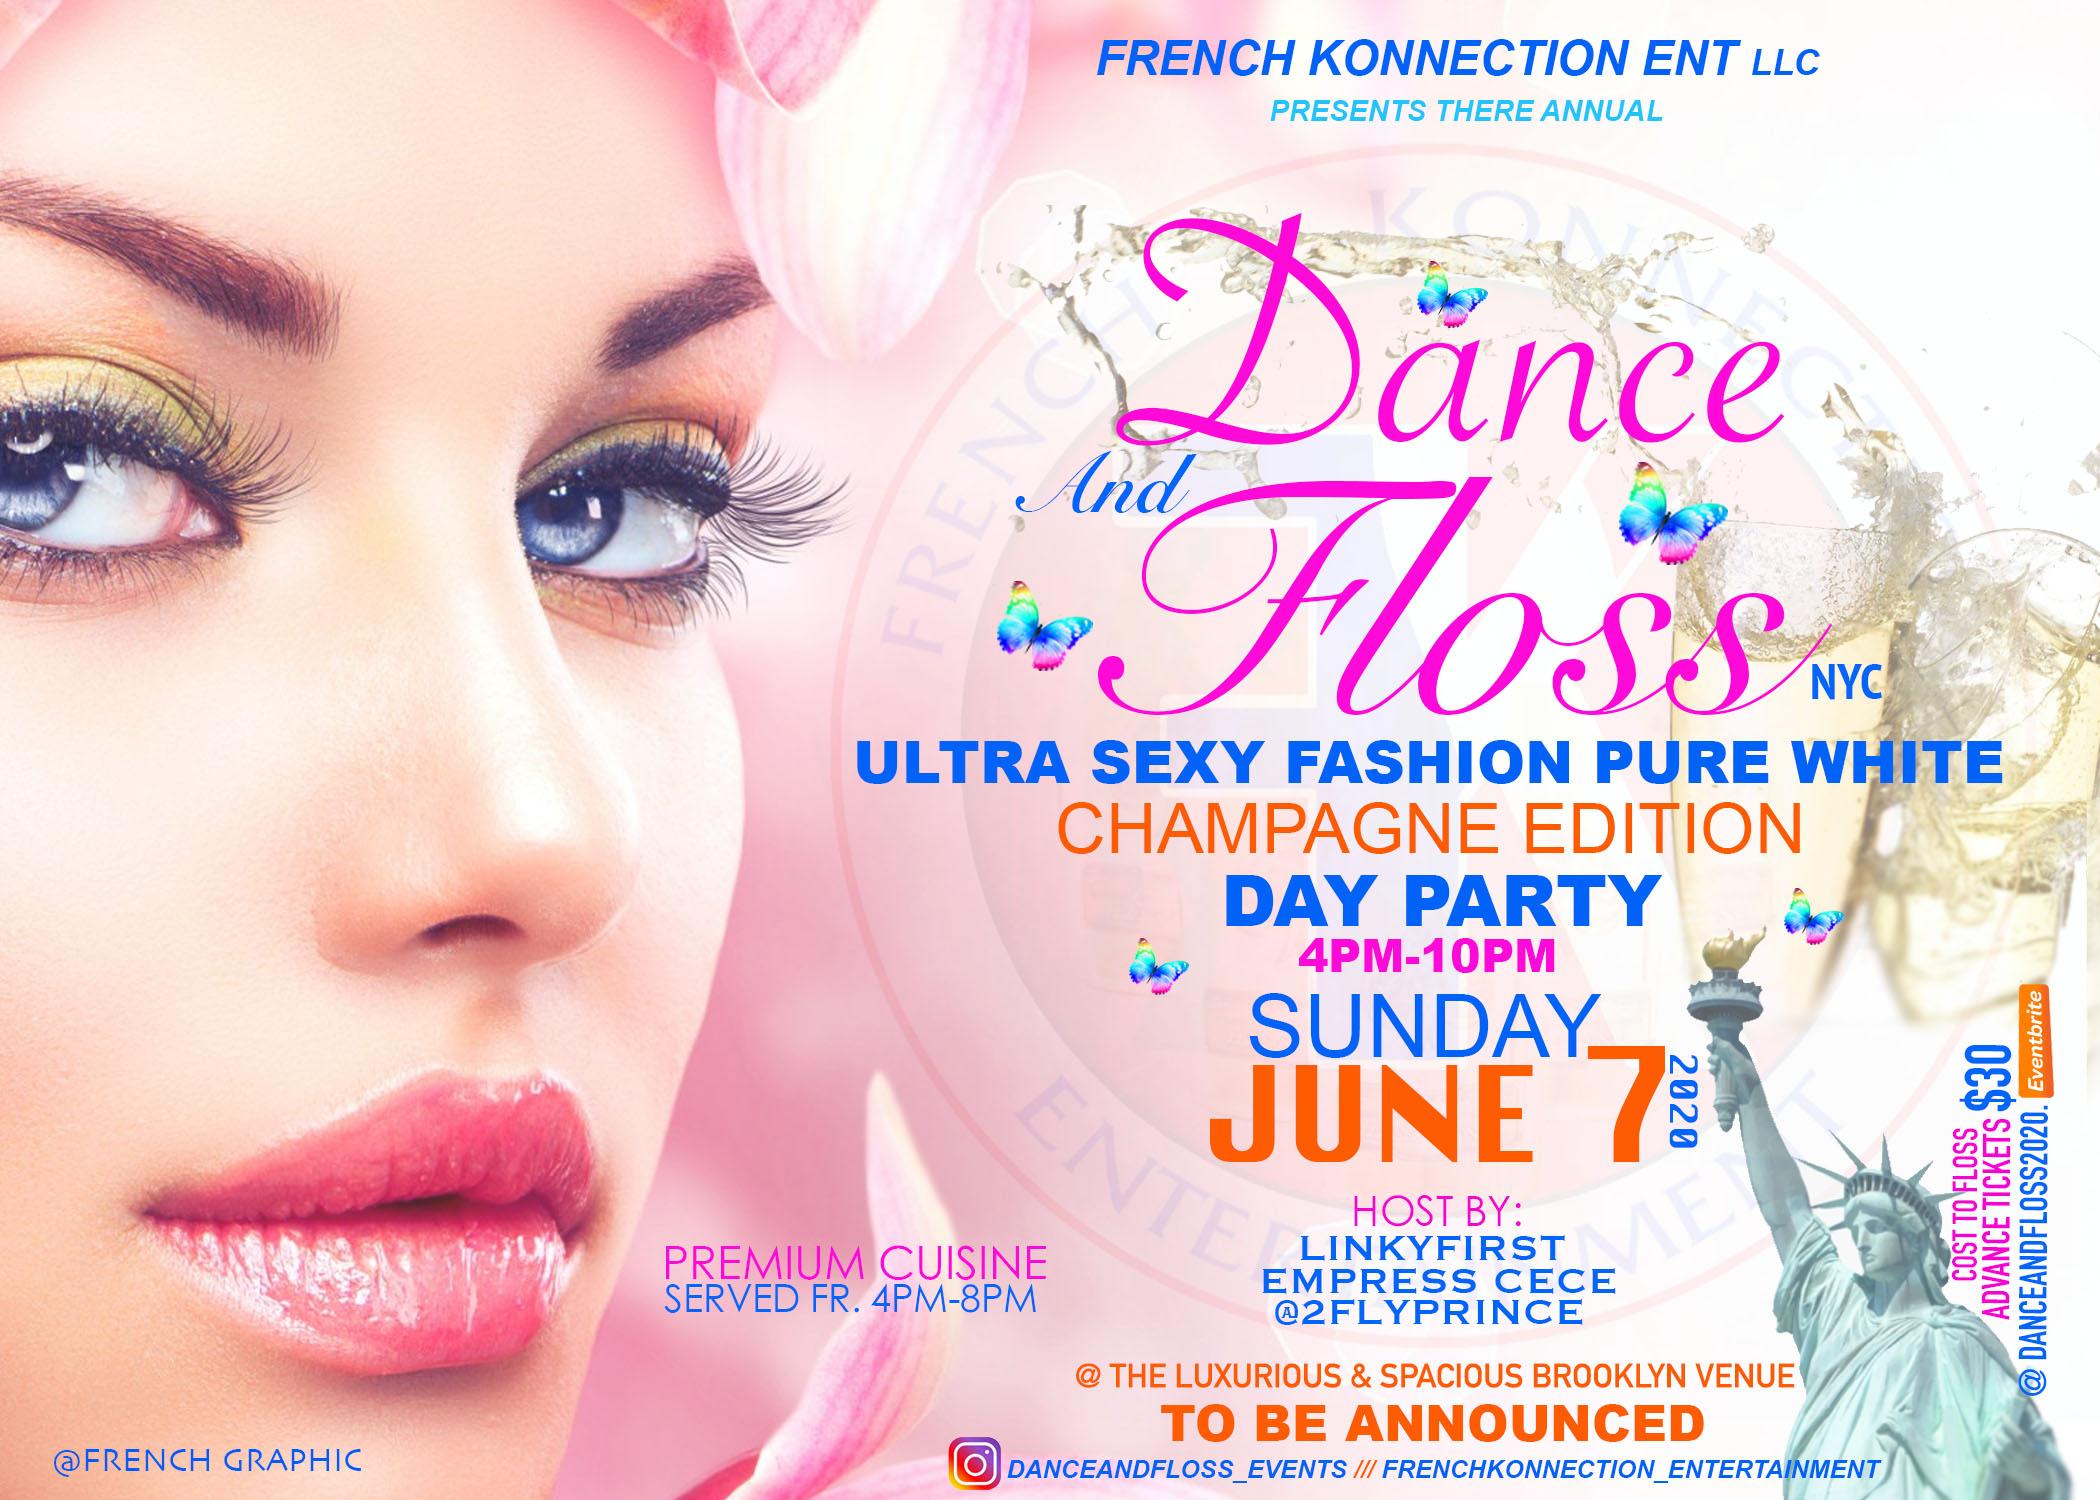 DANCE AND FLOSS The Ultra Sexy Fashion Champagne PURE WHITE DAY PARTY